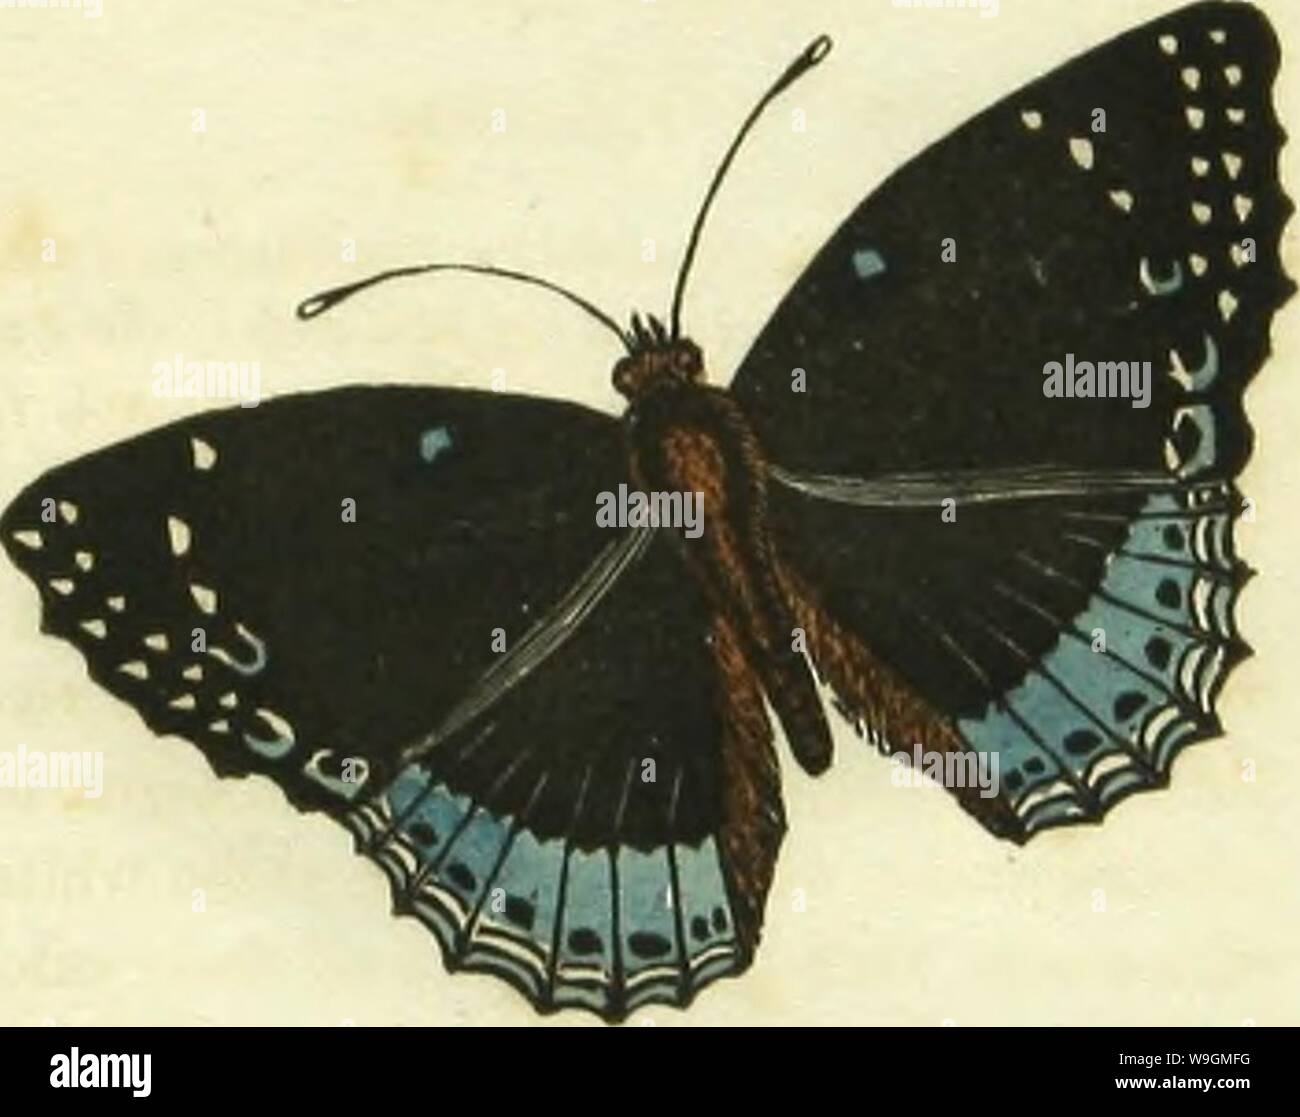 Archive image from page 286 of The book of butterflies, sphinges,. The book of butterflies, sphinges, and moths; illustrated by one hundred and forty-four engravings, coloured after nature  CUbiodiversity1120644-9844 Year: 1834 ( TIIR APATUniN BUTTKnrLY. I'apilio Apatvrina.—Jmt. Stock Photo